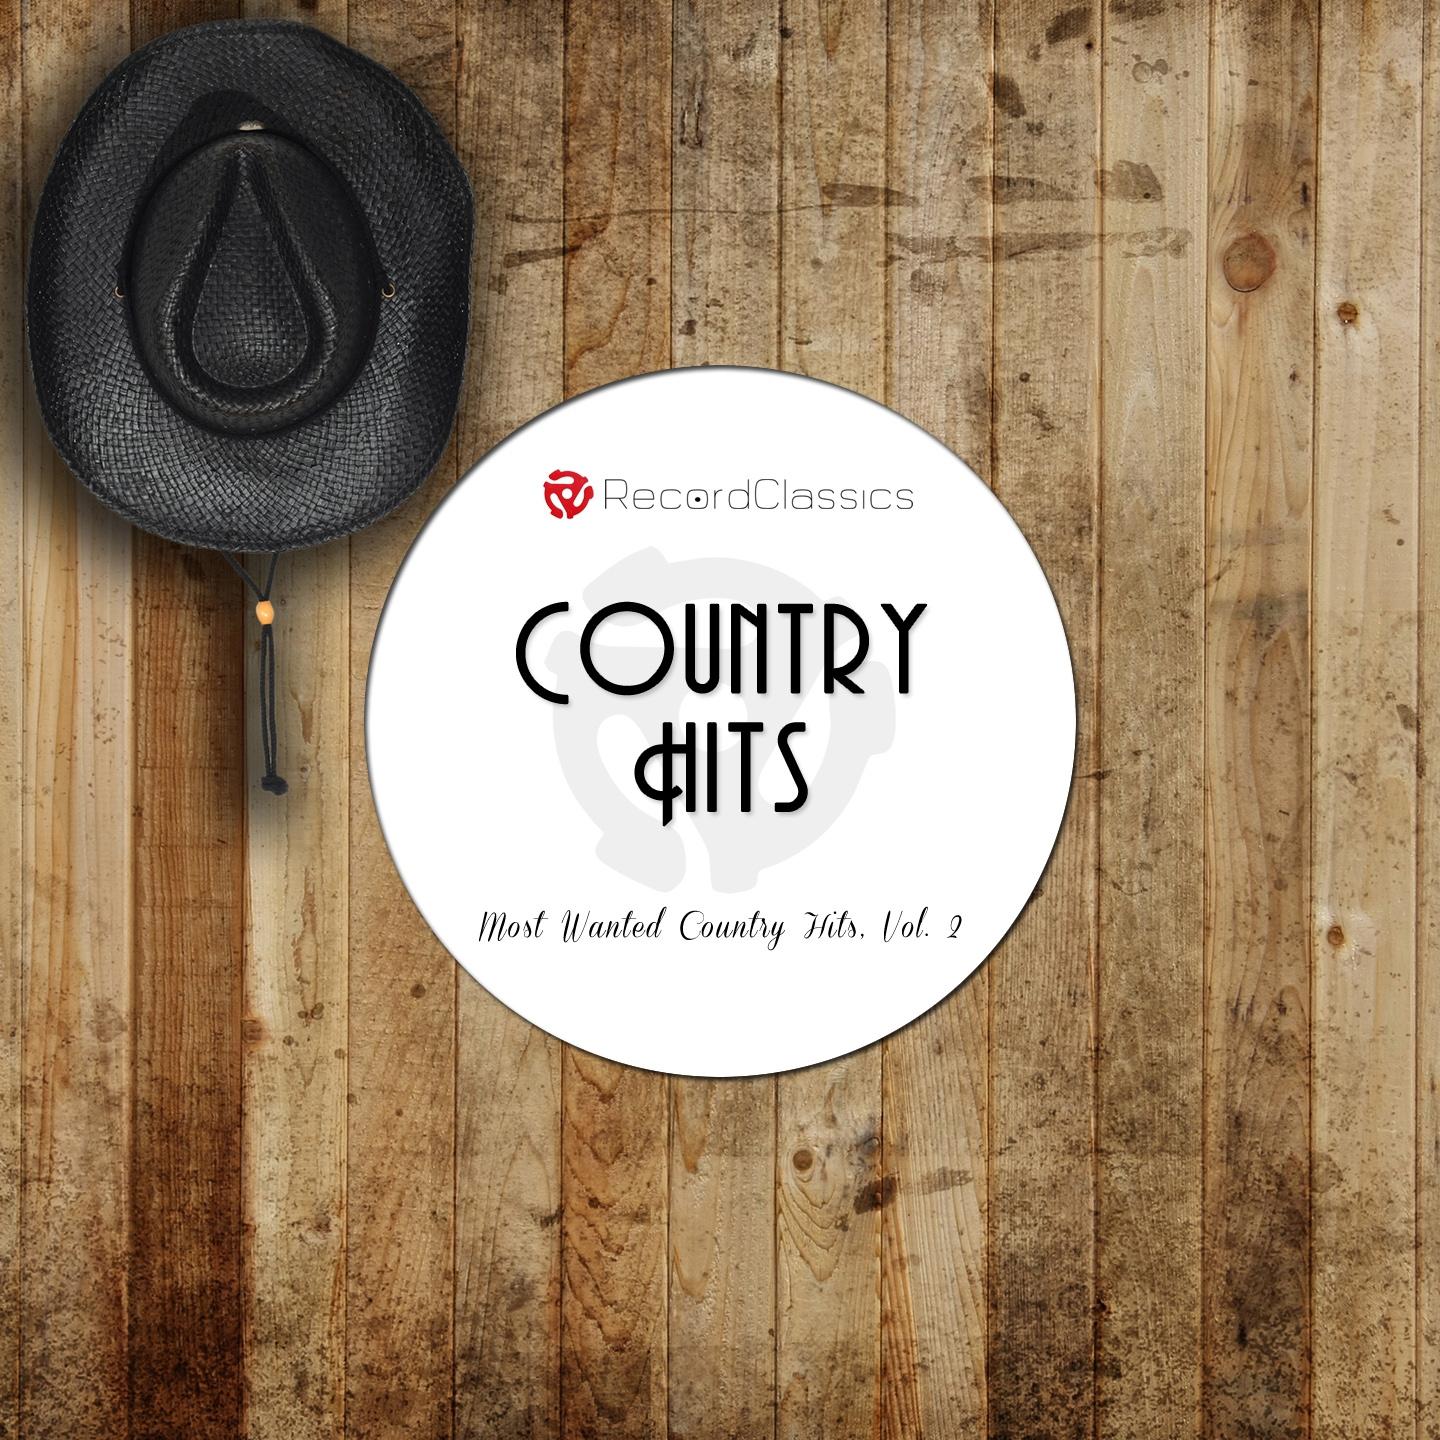 County Hits, Vol. 2 (Most Wanted Country Hits)